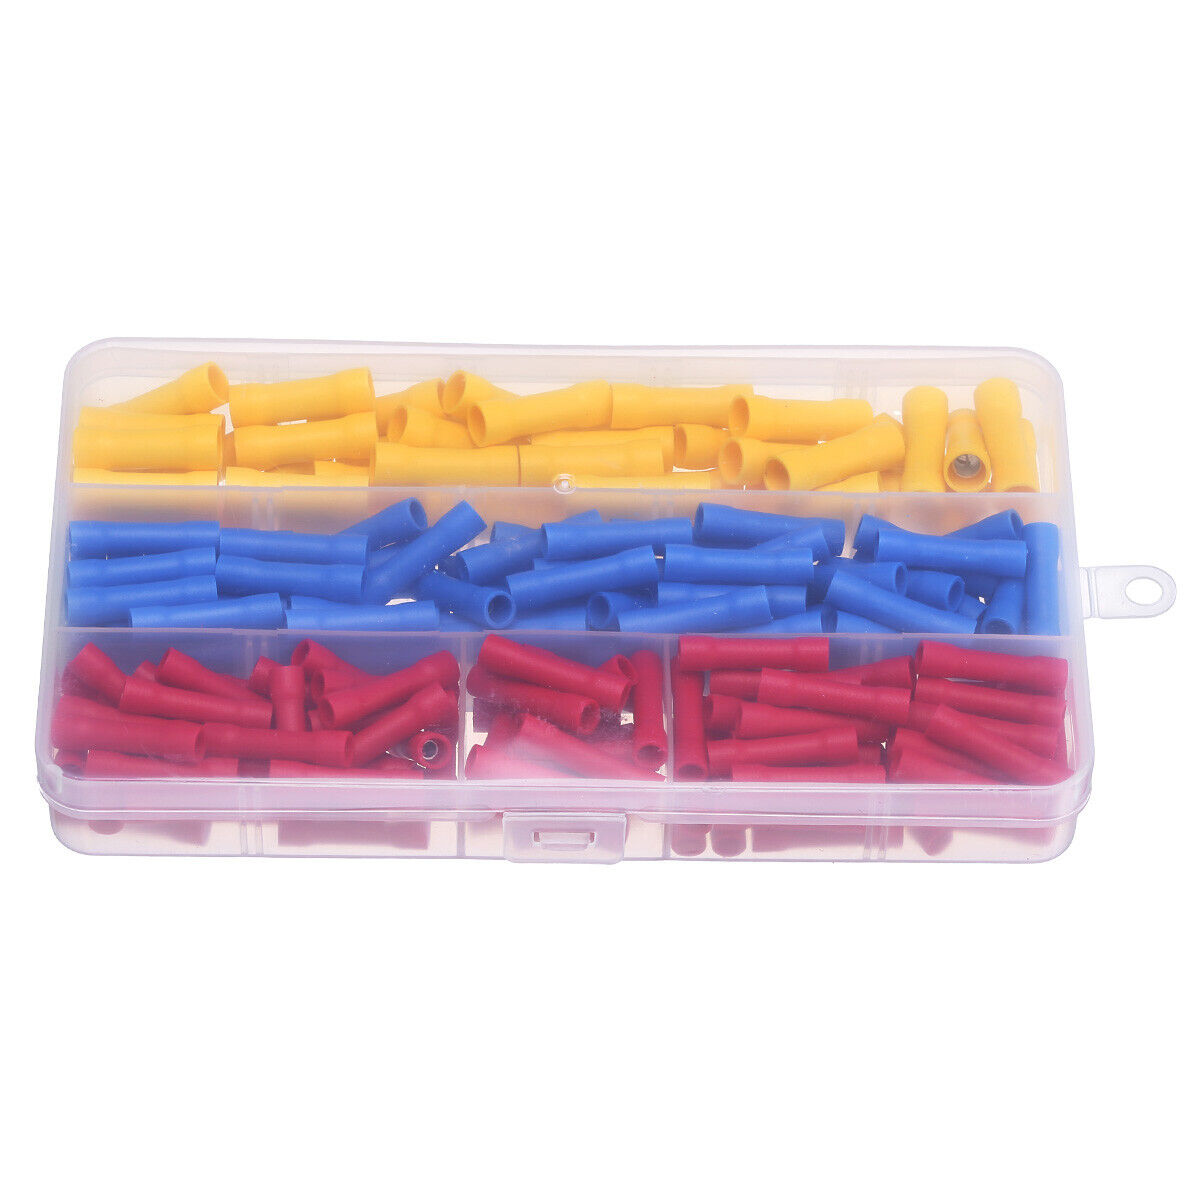 200PCS Insulated Straight Electrical Wire Butt Connectors Crimp Splice Terminals Unbranded Does not Apply - фотография #8